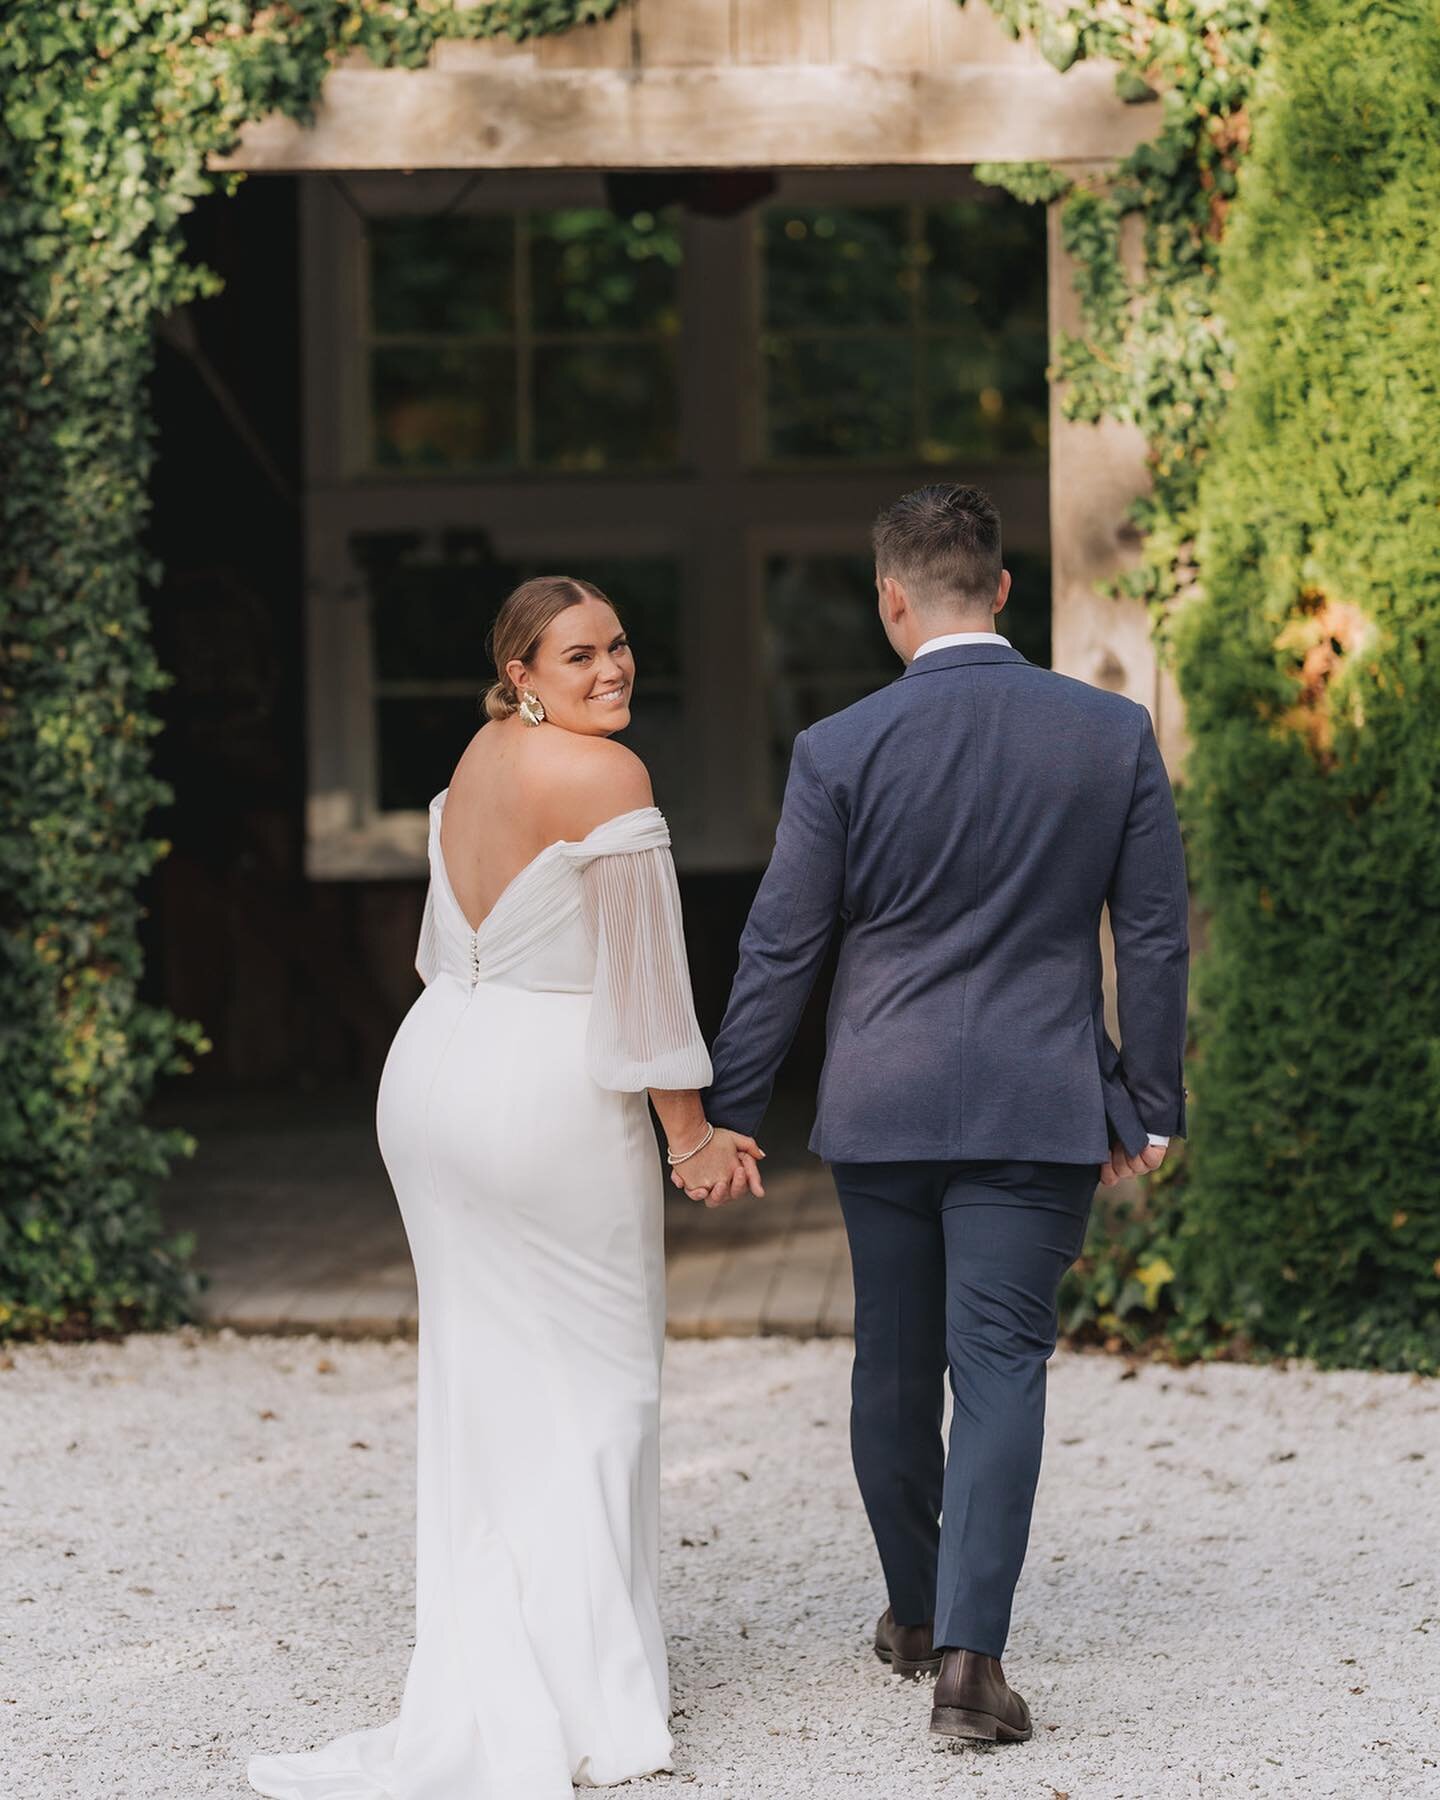 Head over heels for Keely's wedding day style in the Ravello Gown 🥰 
⠀⠀⠀⠀⠀⠀⠀⠀⠀
Keely + Mathew got married @oldforestschool_weddings one of our favourite venues! 
⠀⠀⠀⠀⠀⠀⠀⠀⠀
Beautiful photos @leroexmedia
Hair and Makeup @lipstick_and_co_team @ashleeha